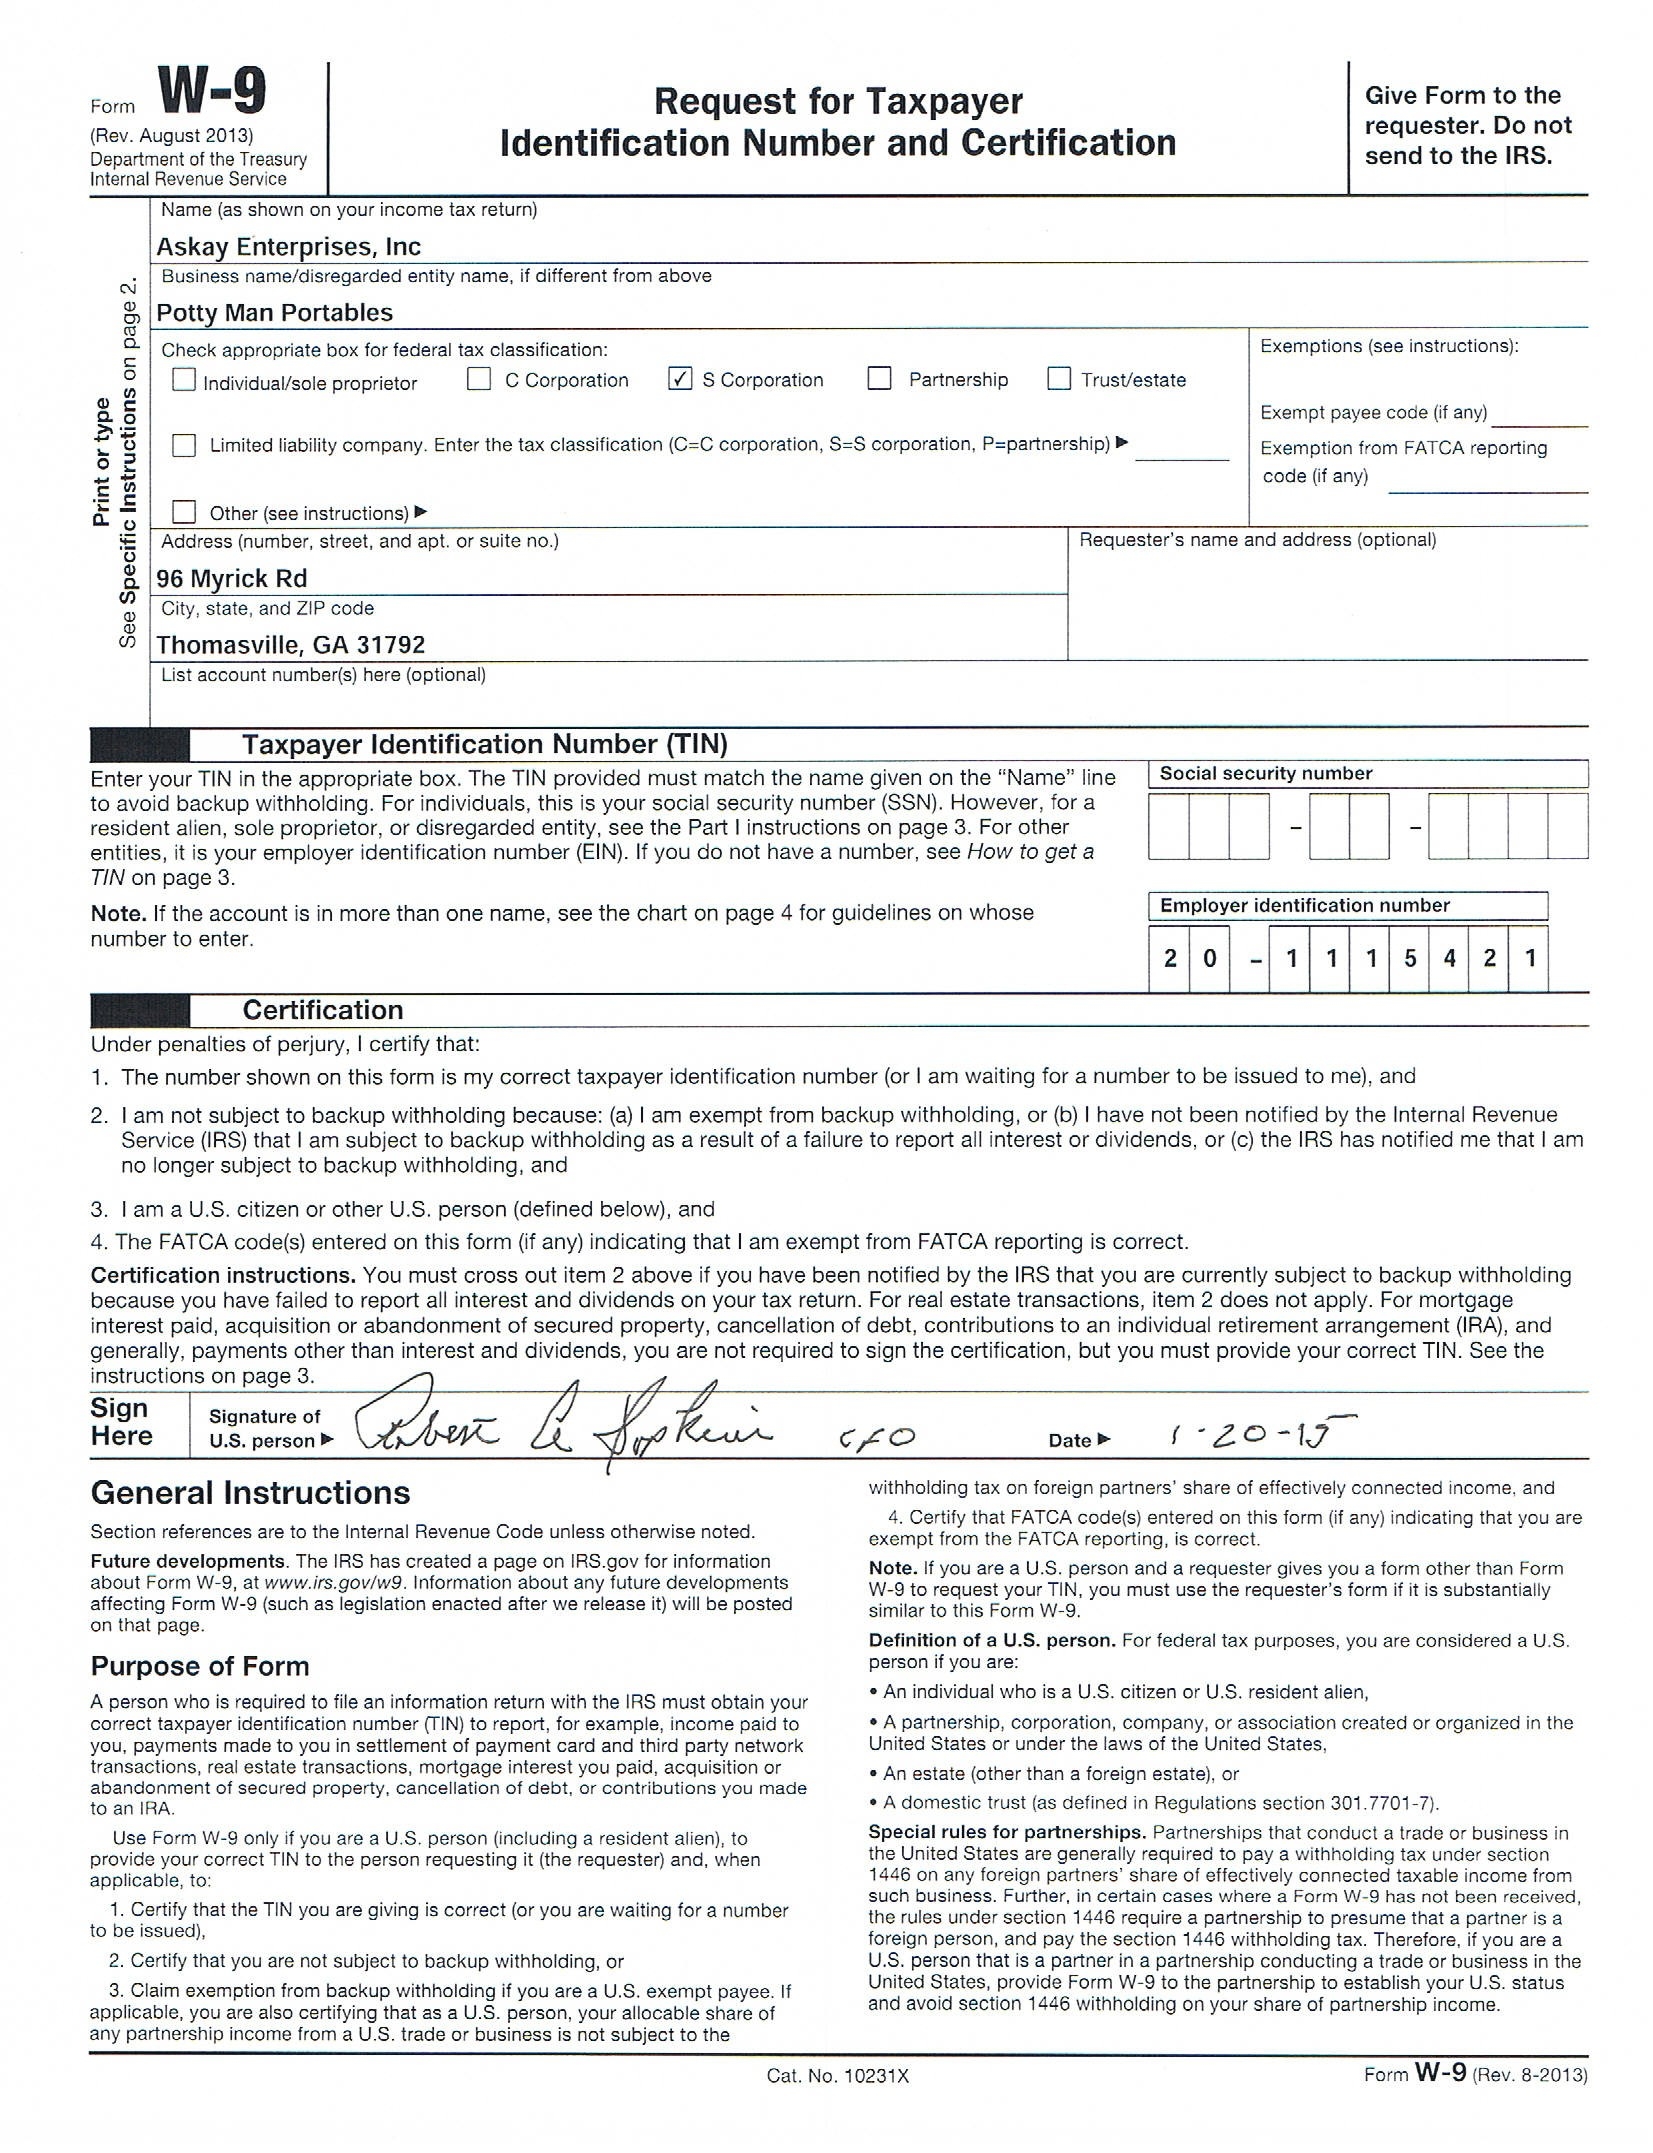 W 9 Tax Form Irs Blank For 2016 Design Templates 2014 Choice-Printable Blank W9 Form